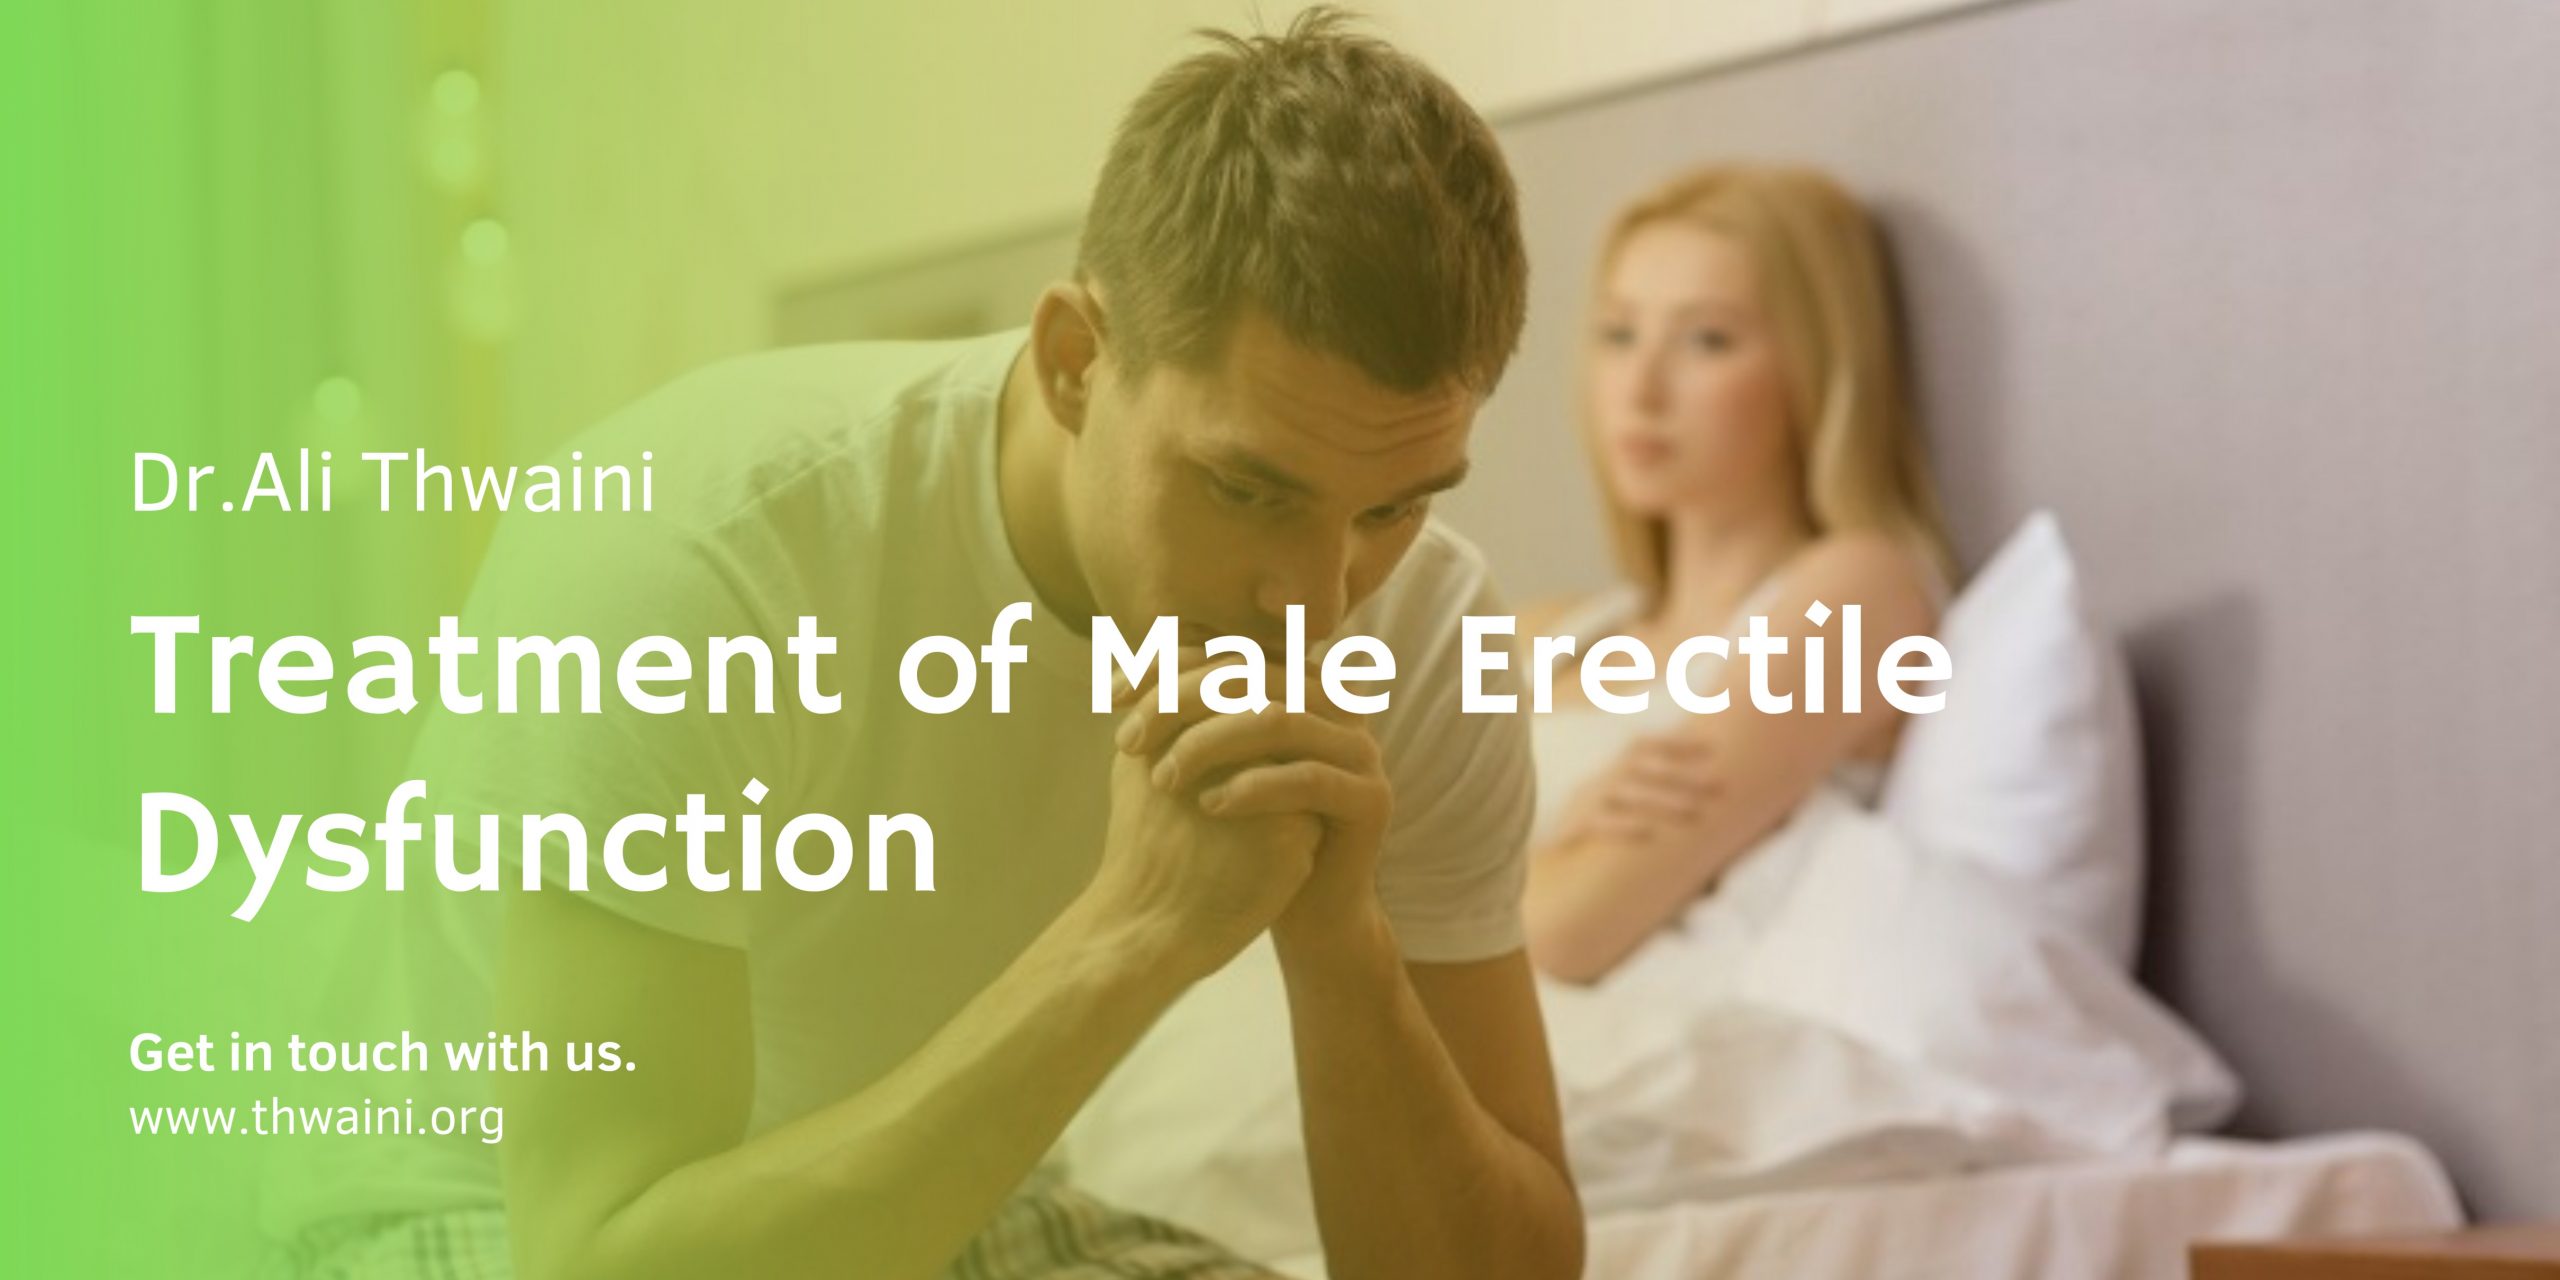 Adult Derived Stem Cells with Low-Intensity Shock Wave for the Treatment of Male Erectile Dysfunction